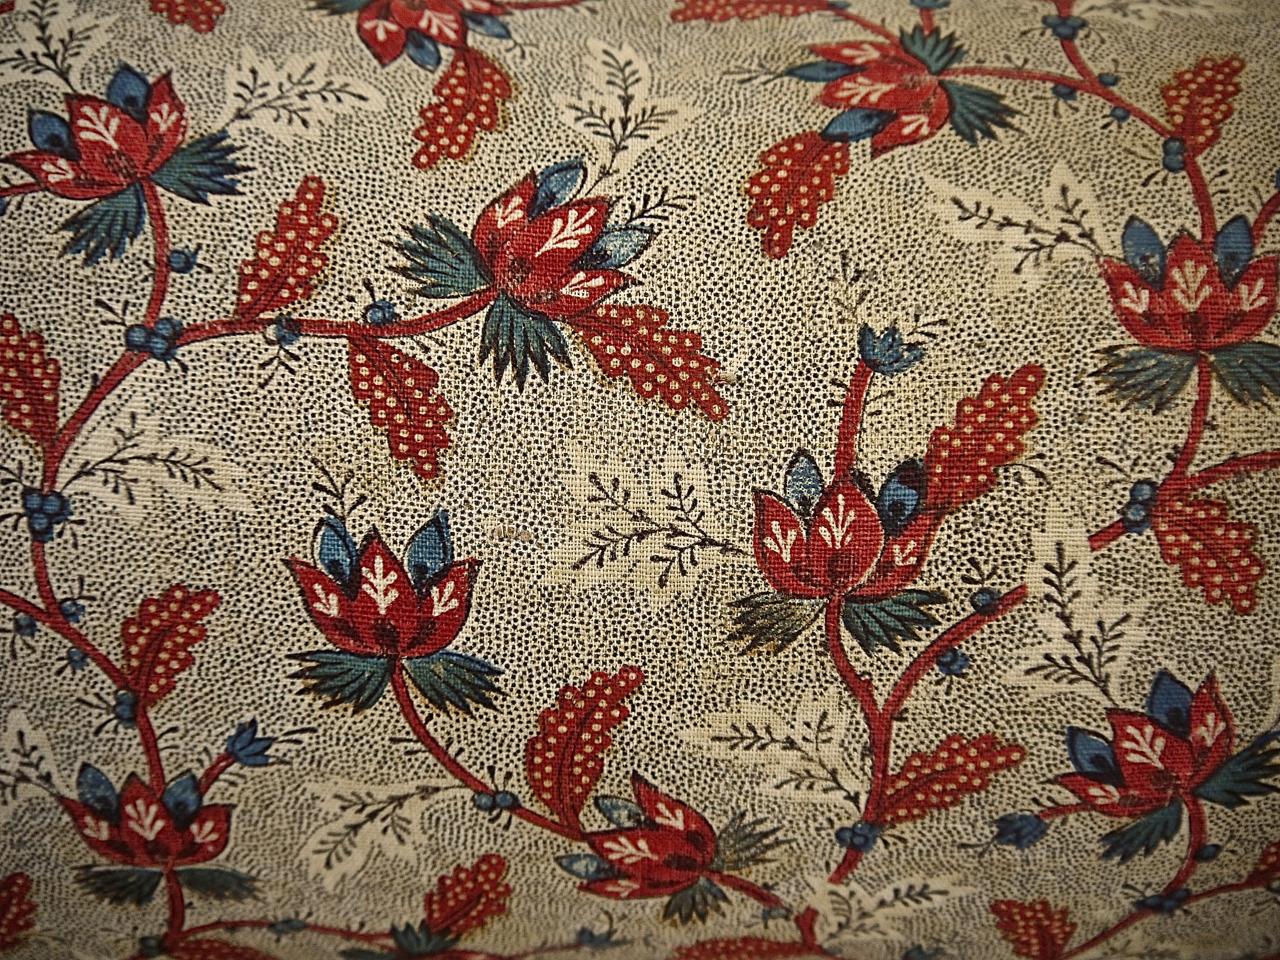 French 18th century block printed textile with a design of red stylized flowers and leaves on meandering branches with touches of blue on a picotage ground. Lightly quilted. Backed in a natural indigo dyed French 19th century linen. Slip-stitched